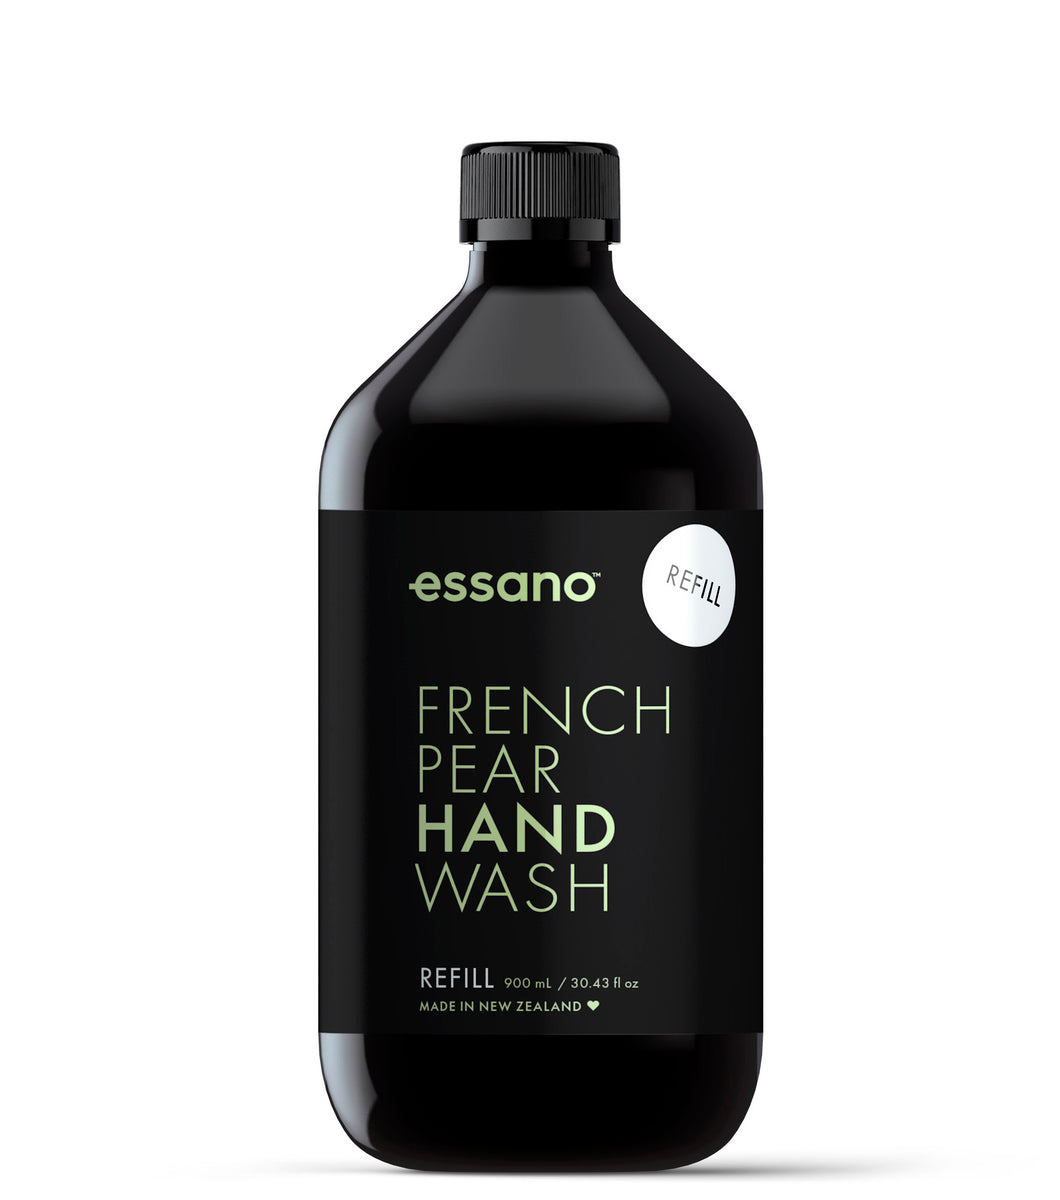 French Pear Hand Wash Refill